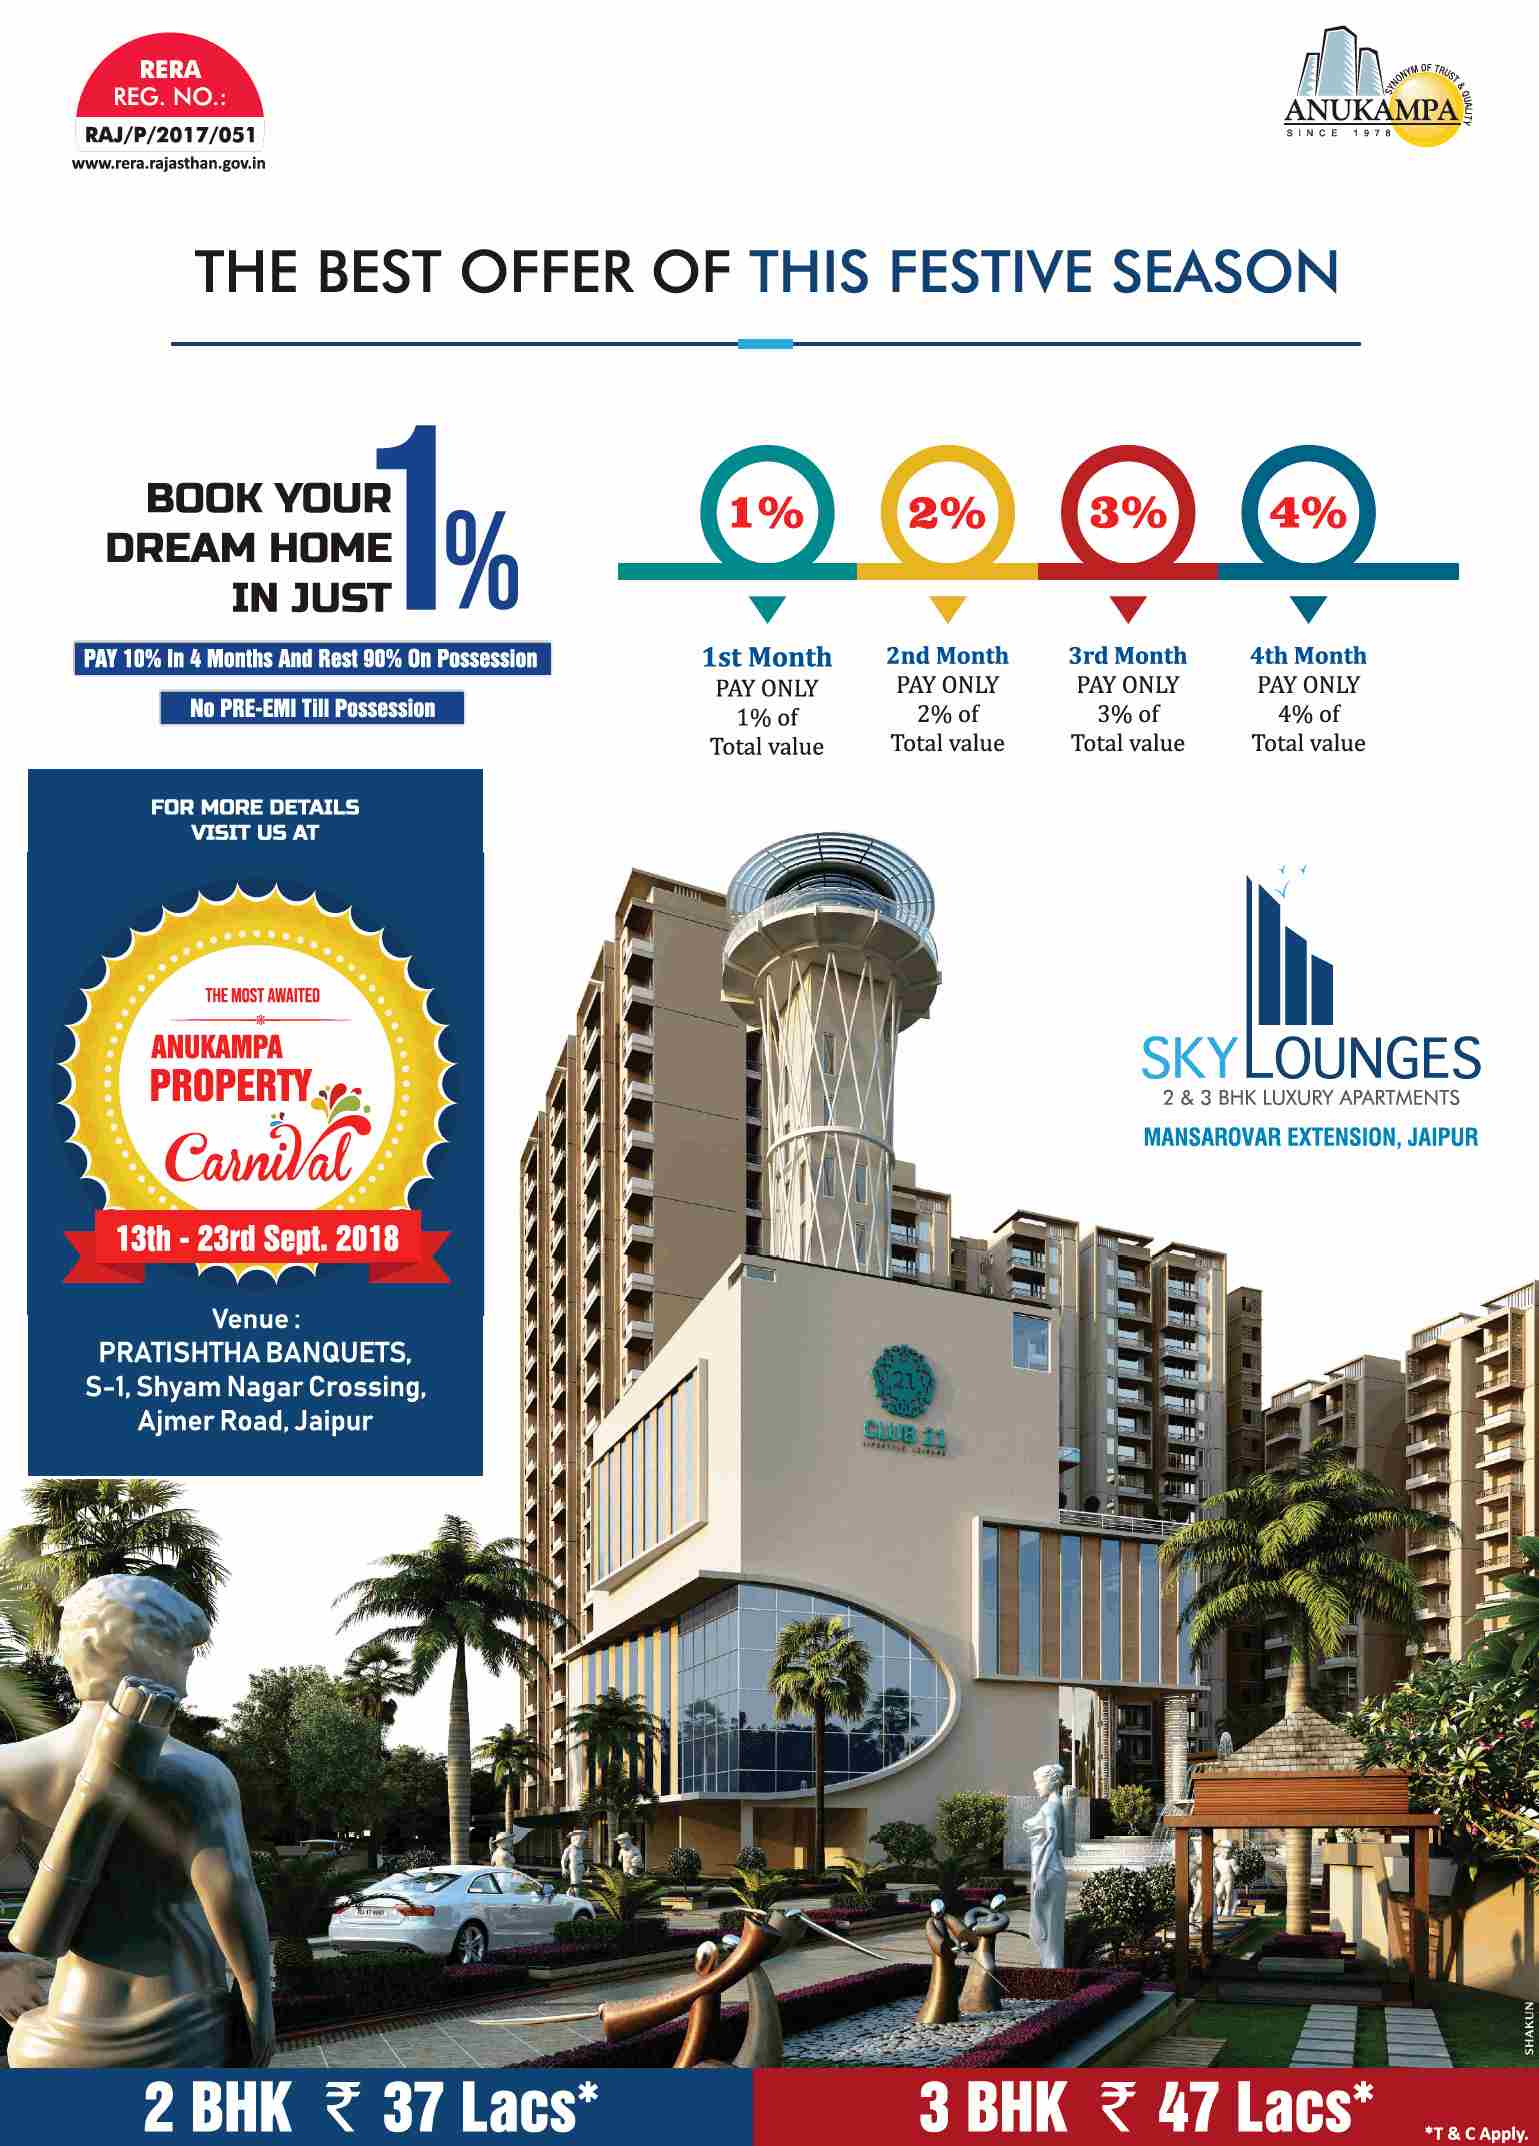 Pay 10% in 4 months & rest 90% on possession at Anukampa Sky Lounges in Jaipur Update